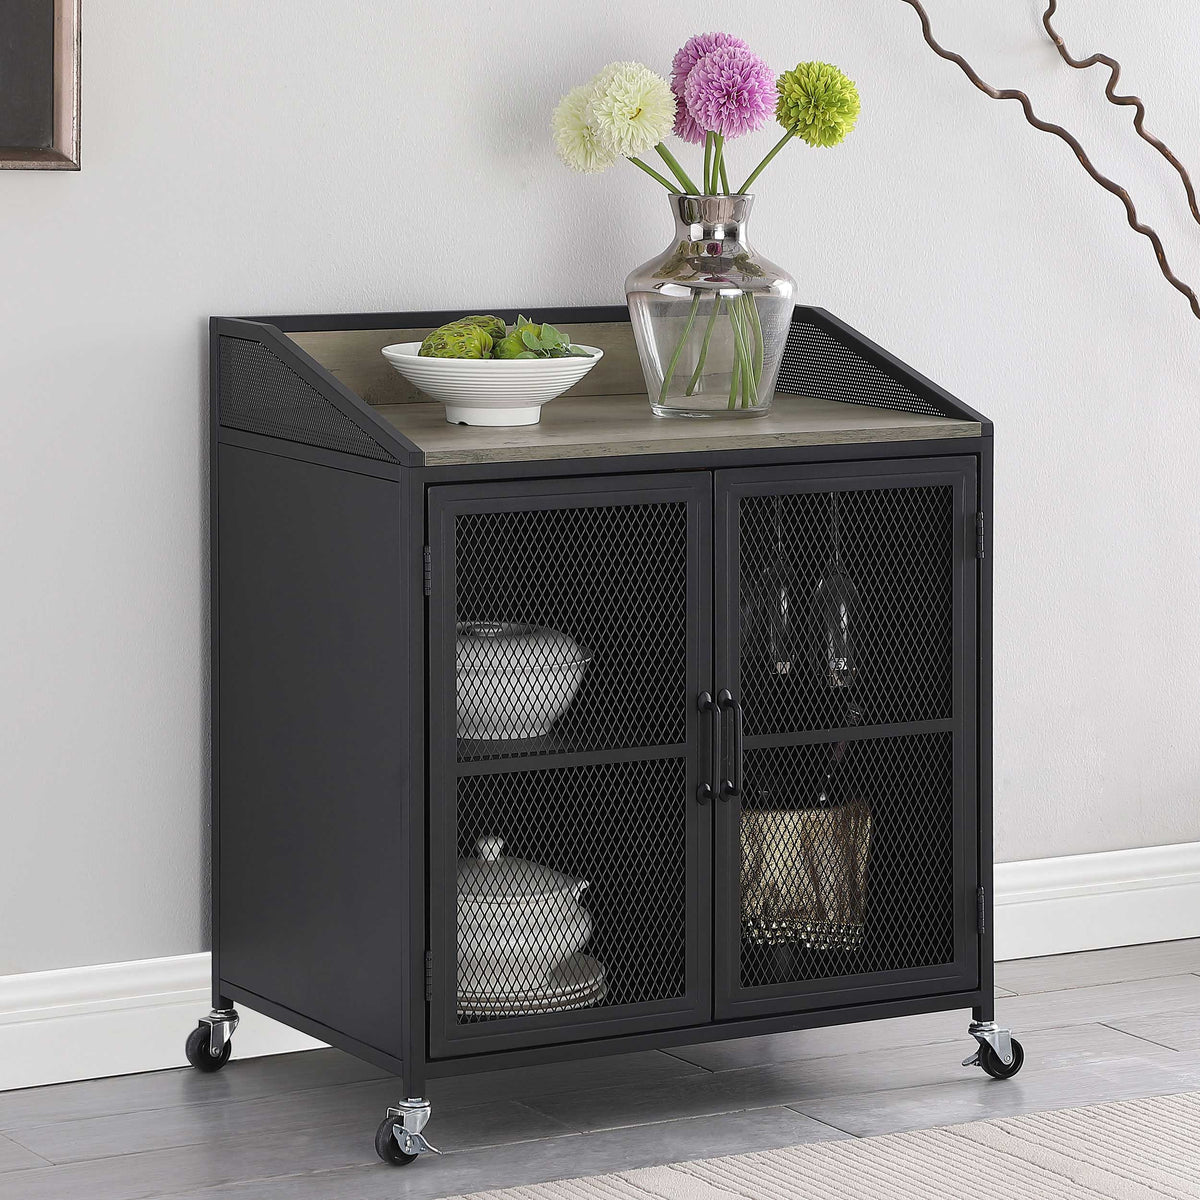 Arlette Wine Cabinet with Wire Mesh Doors Grey Wash and Sandy Black Arlette Wine Cabinet with Wire Mesh Doors Grey Wash and Sandy Black Half Price Furniture